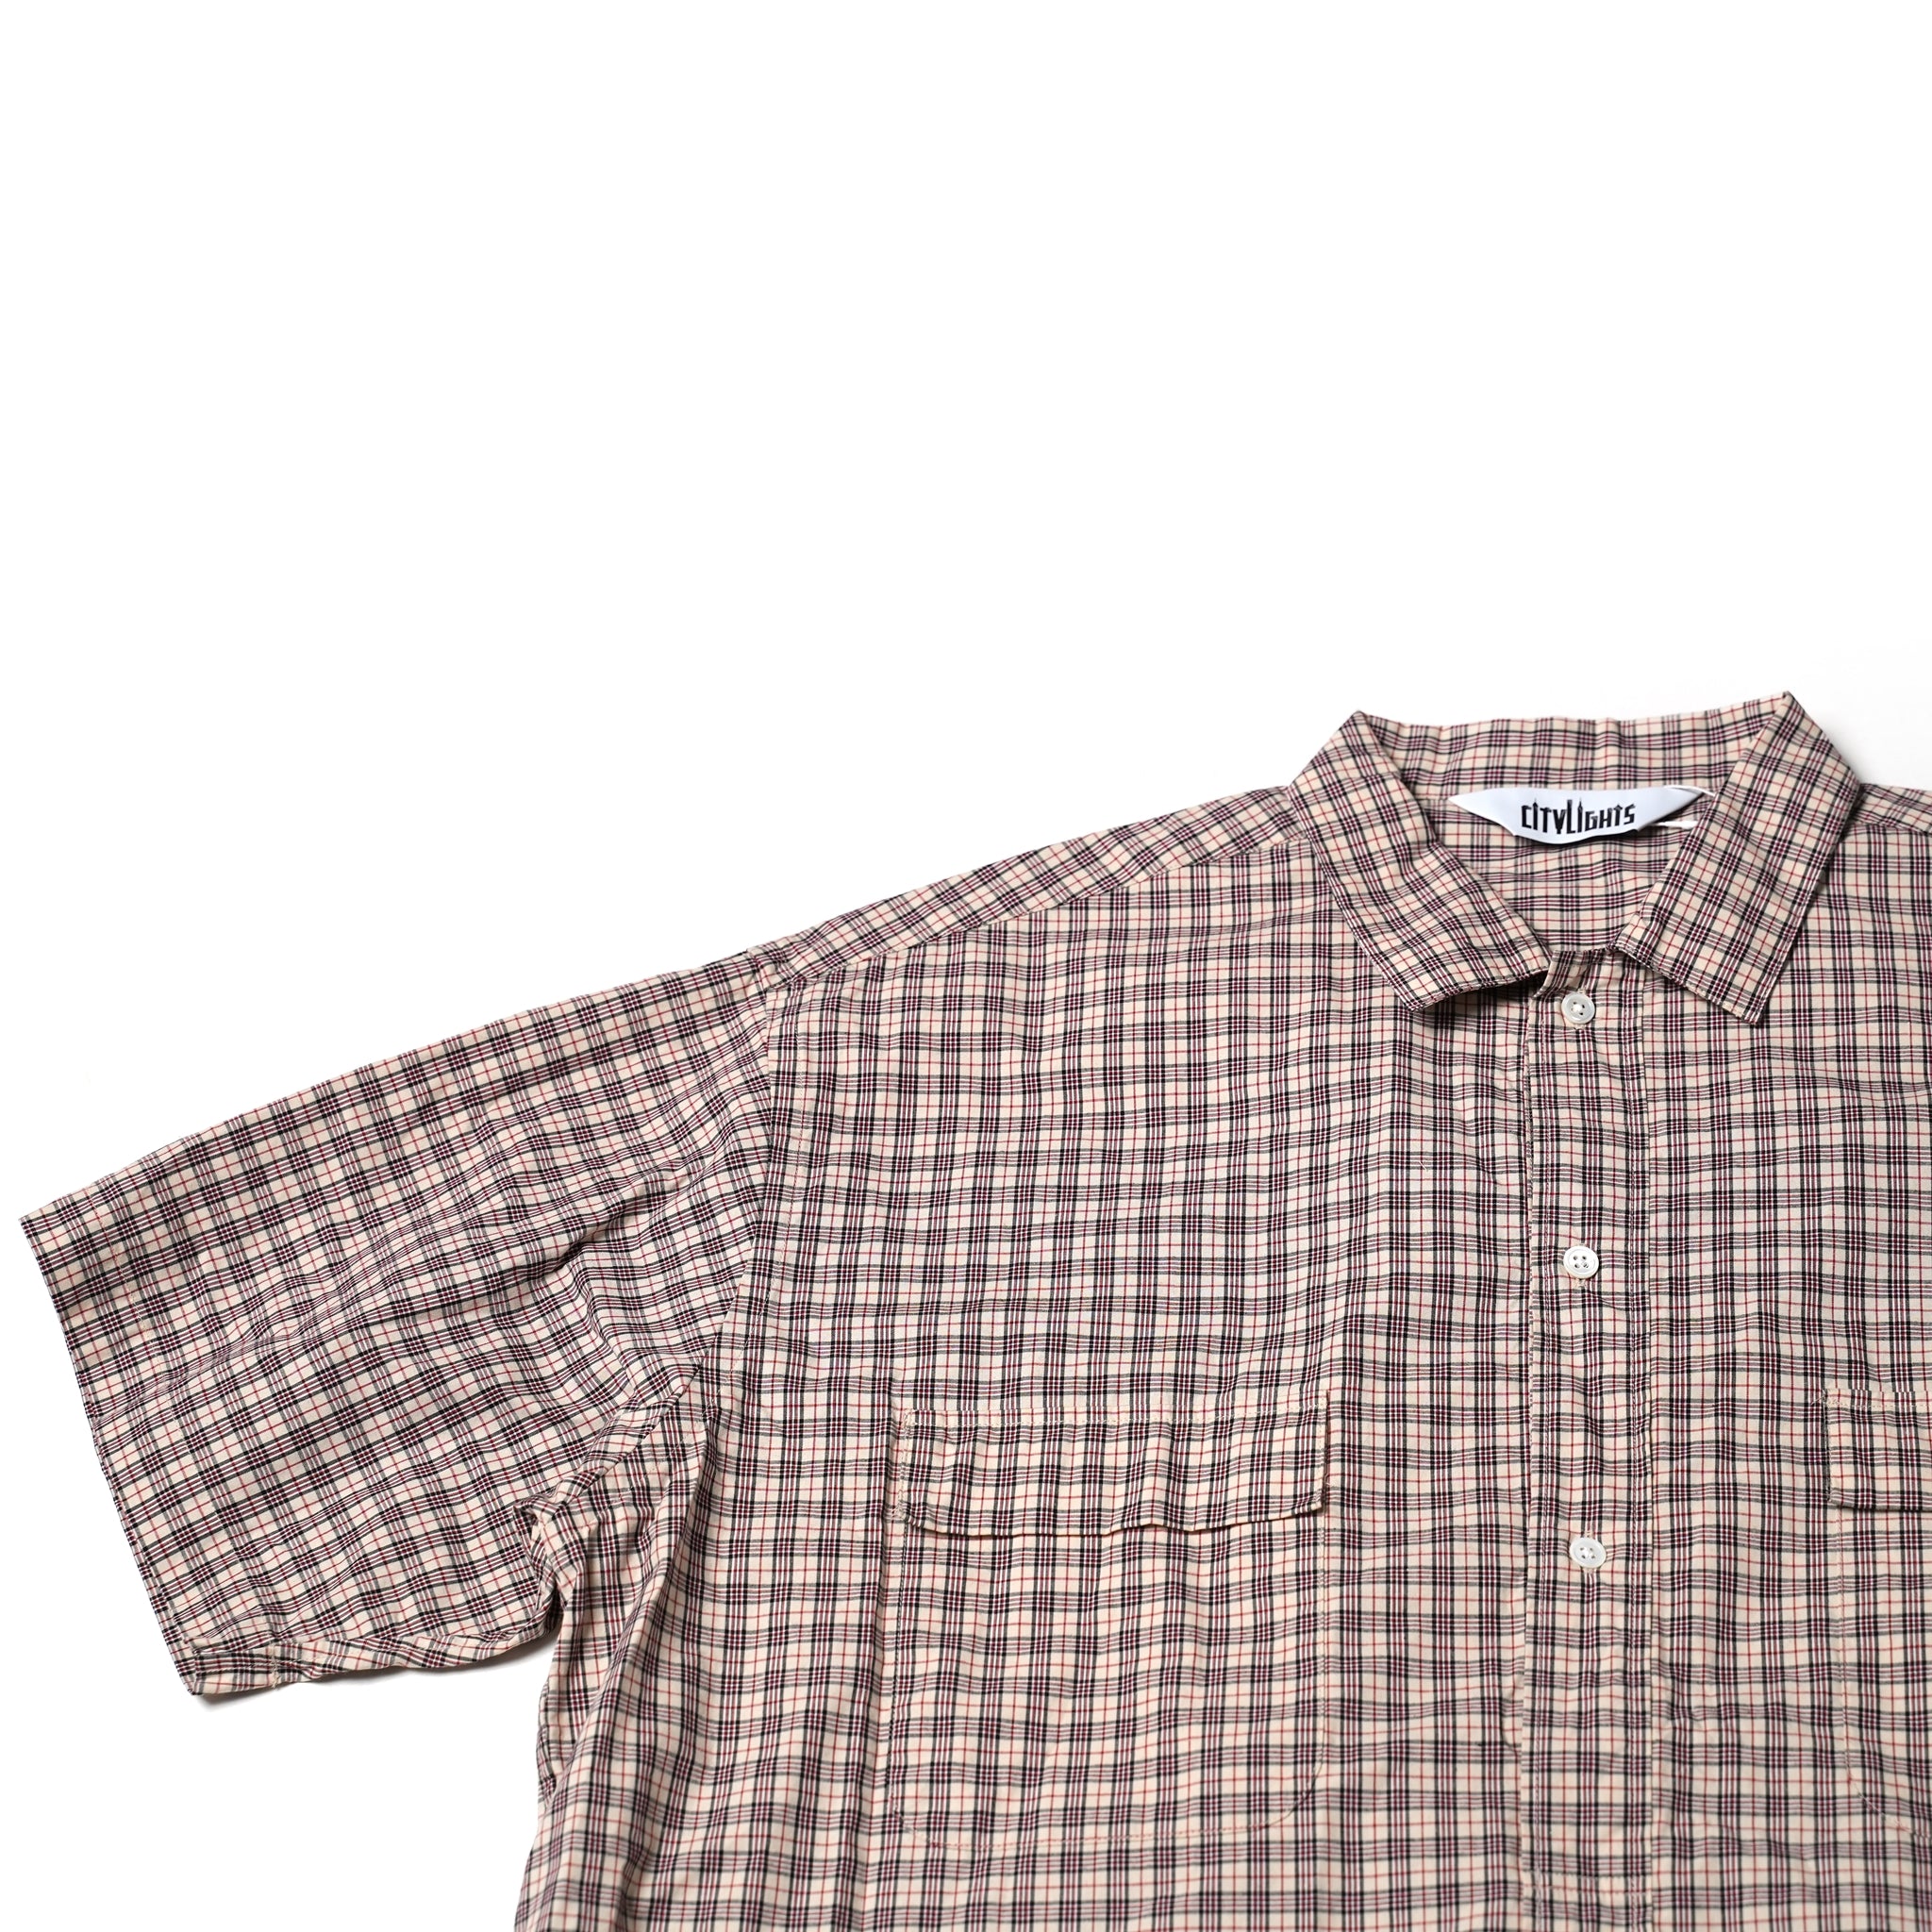 Name: CHAUNCEY SHIRT | Color: BEIGE PLAID 【CITYLIGHTS PRODUCTS_シティライツプロダクツ】